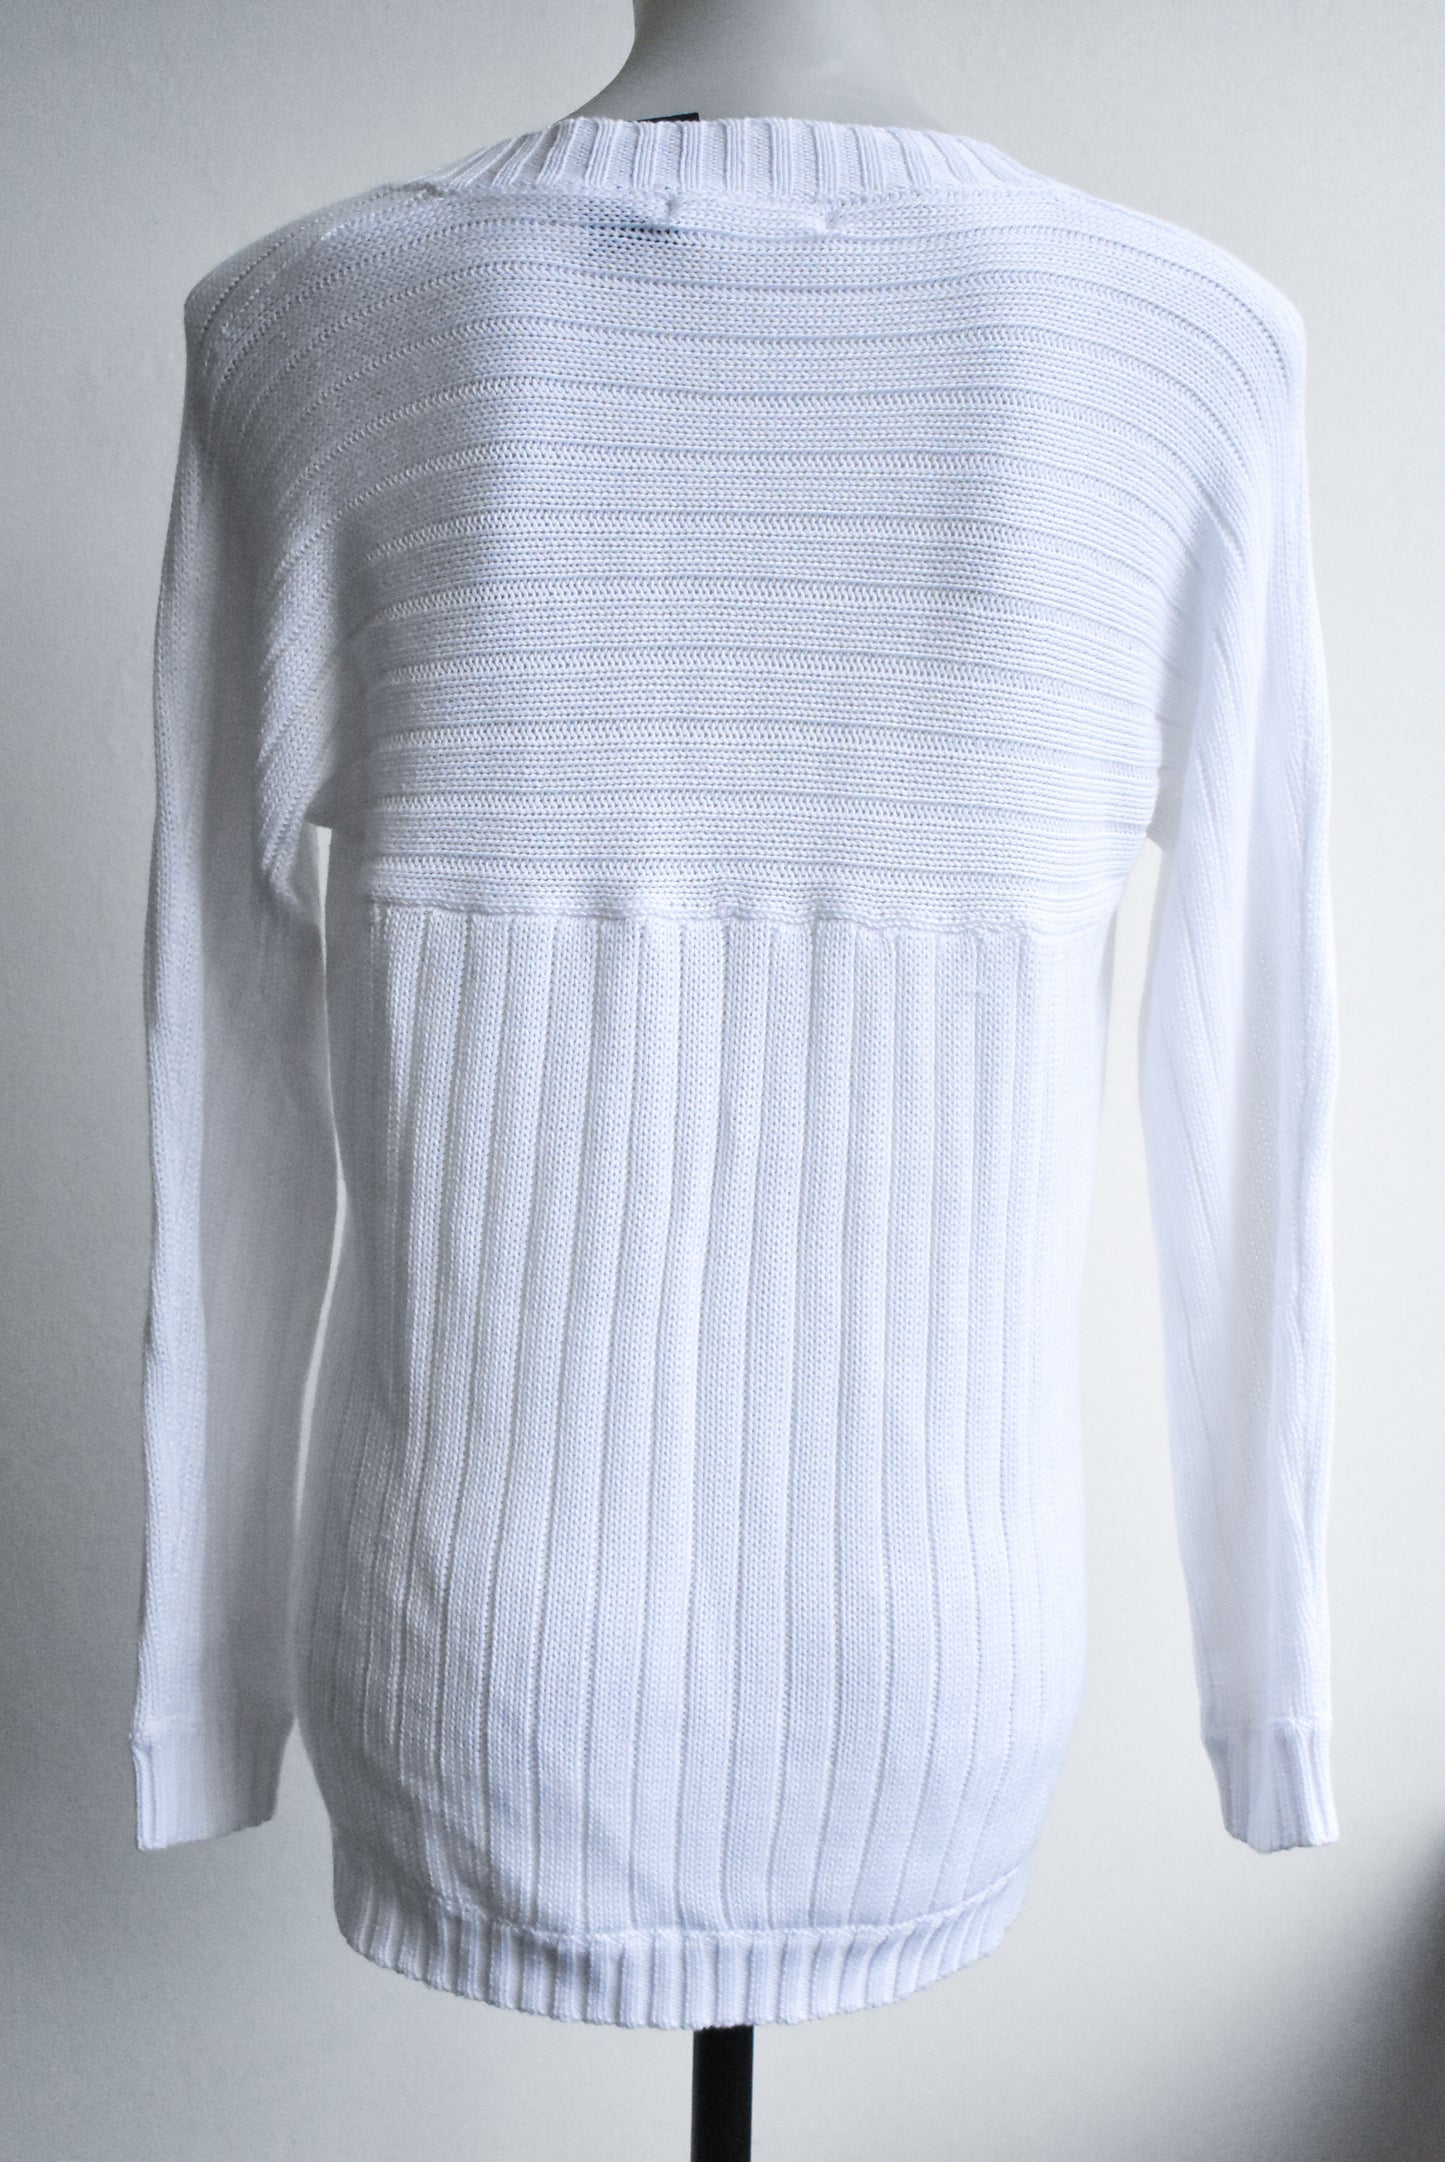 Sills cable-knit cotton sweater, size S